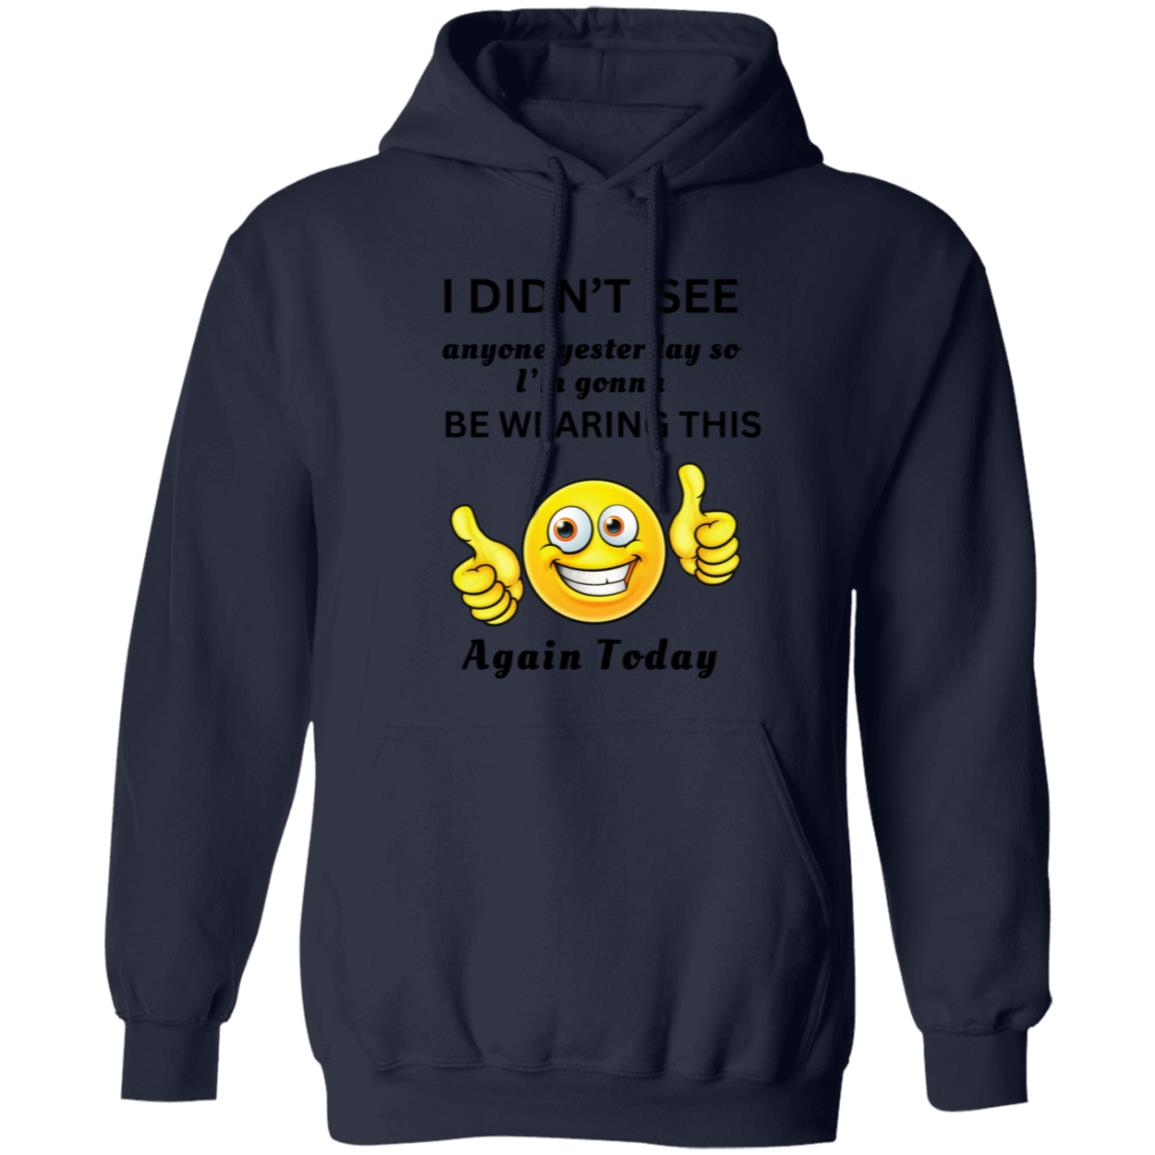 I DIDN’T SEE ANYONE YESTERDAY... (UNISEX) HOODIE